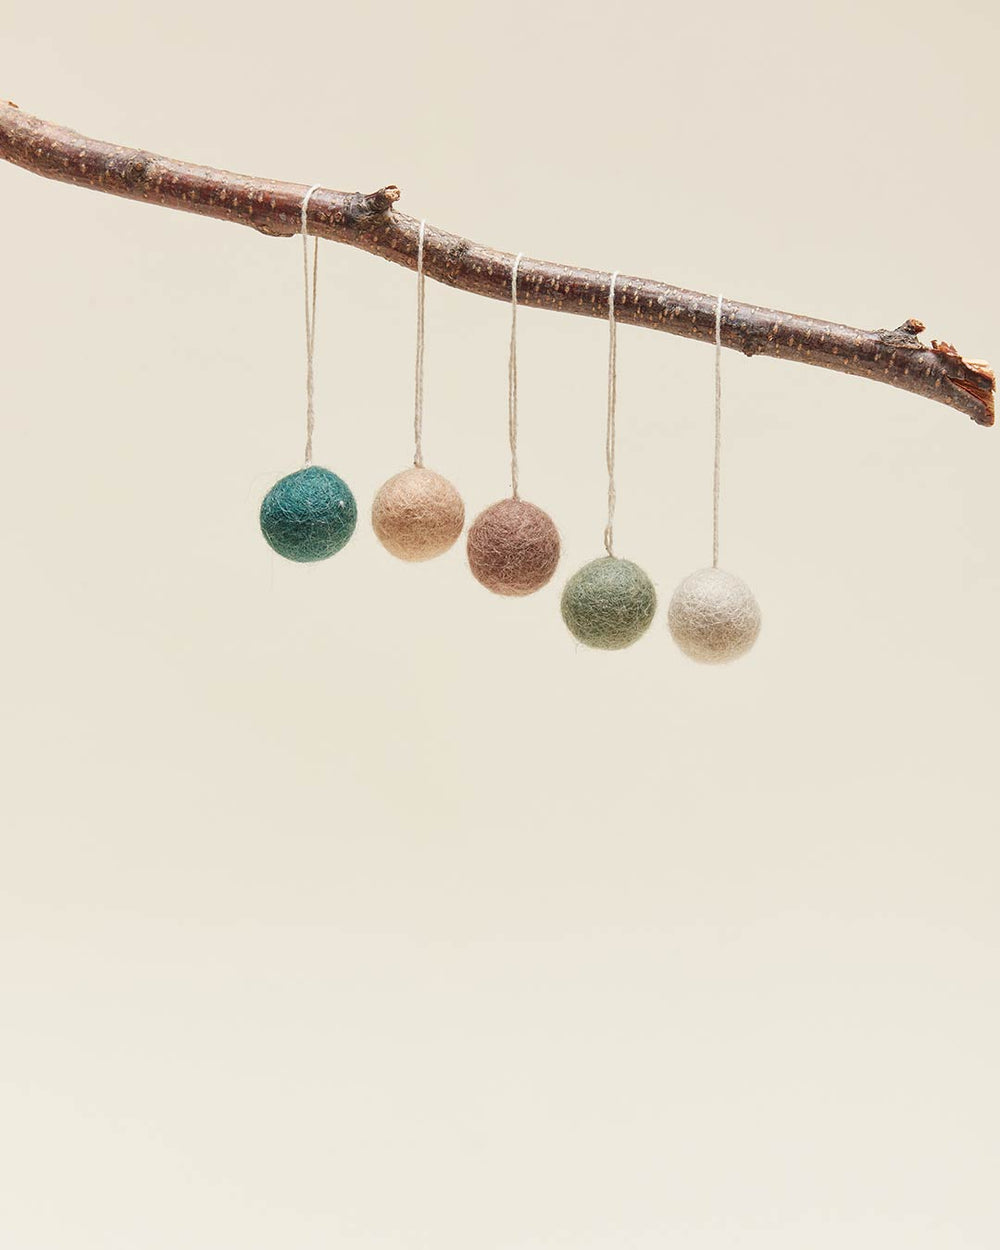 Felted Mini Baubles - Set of 25